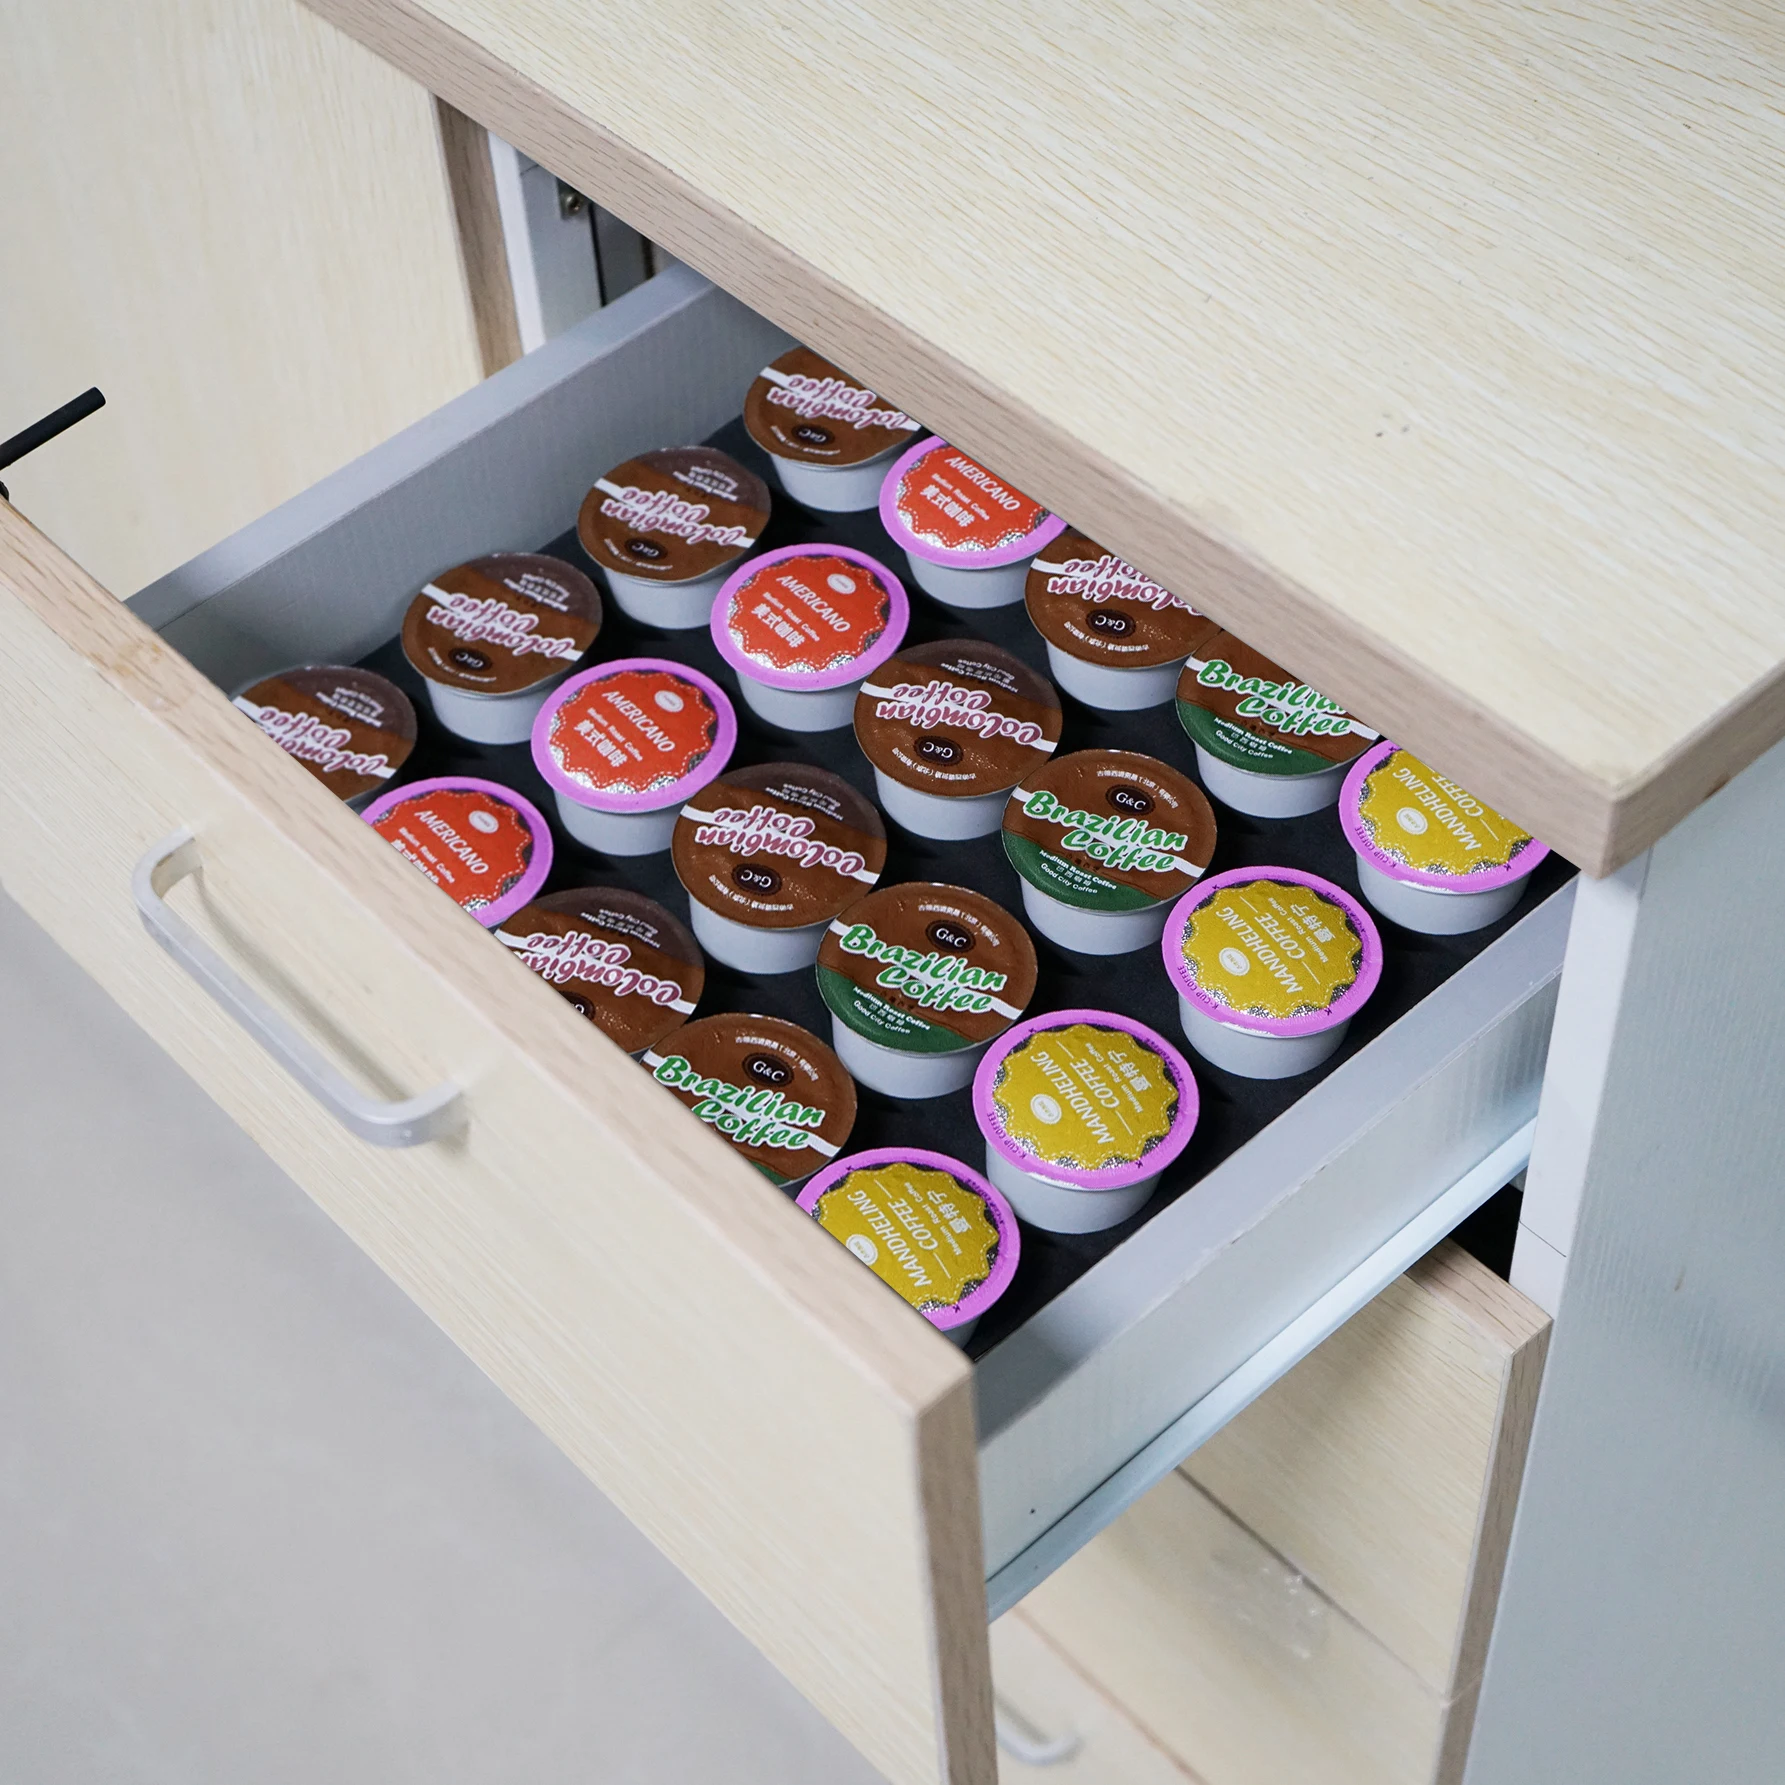 https://ae01.alicdn.com/kf/S36e851eea7e8474991f28322e702d17db/K-Cup-Holder-Compatible-With-Keurig-Coffee-Pods-K-Cup-Drawer-Organizer-Holders-For-Counter-K.jpg